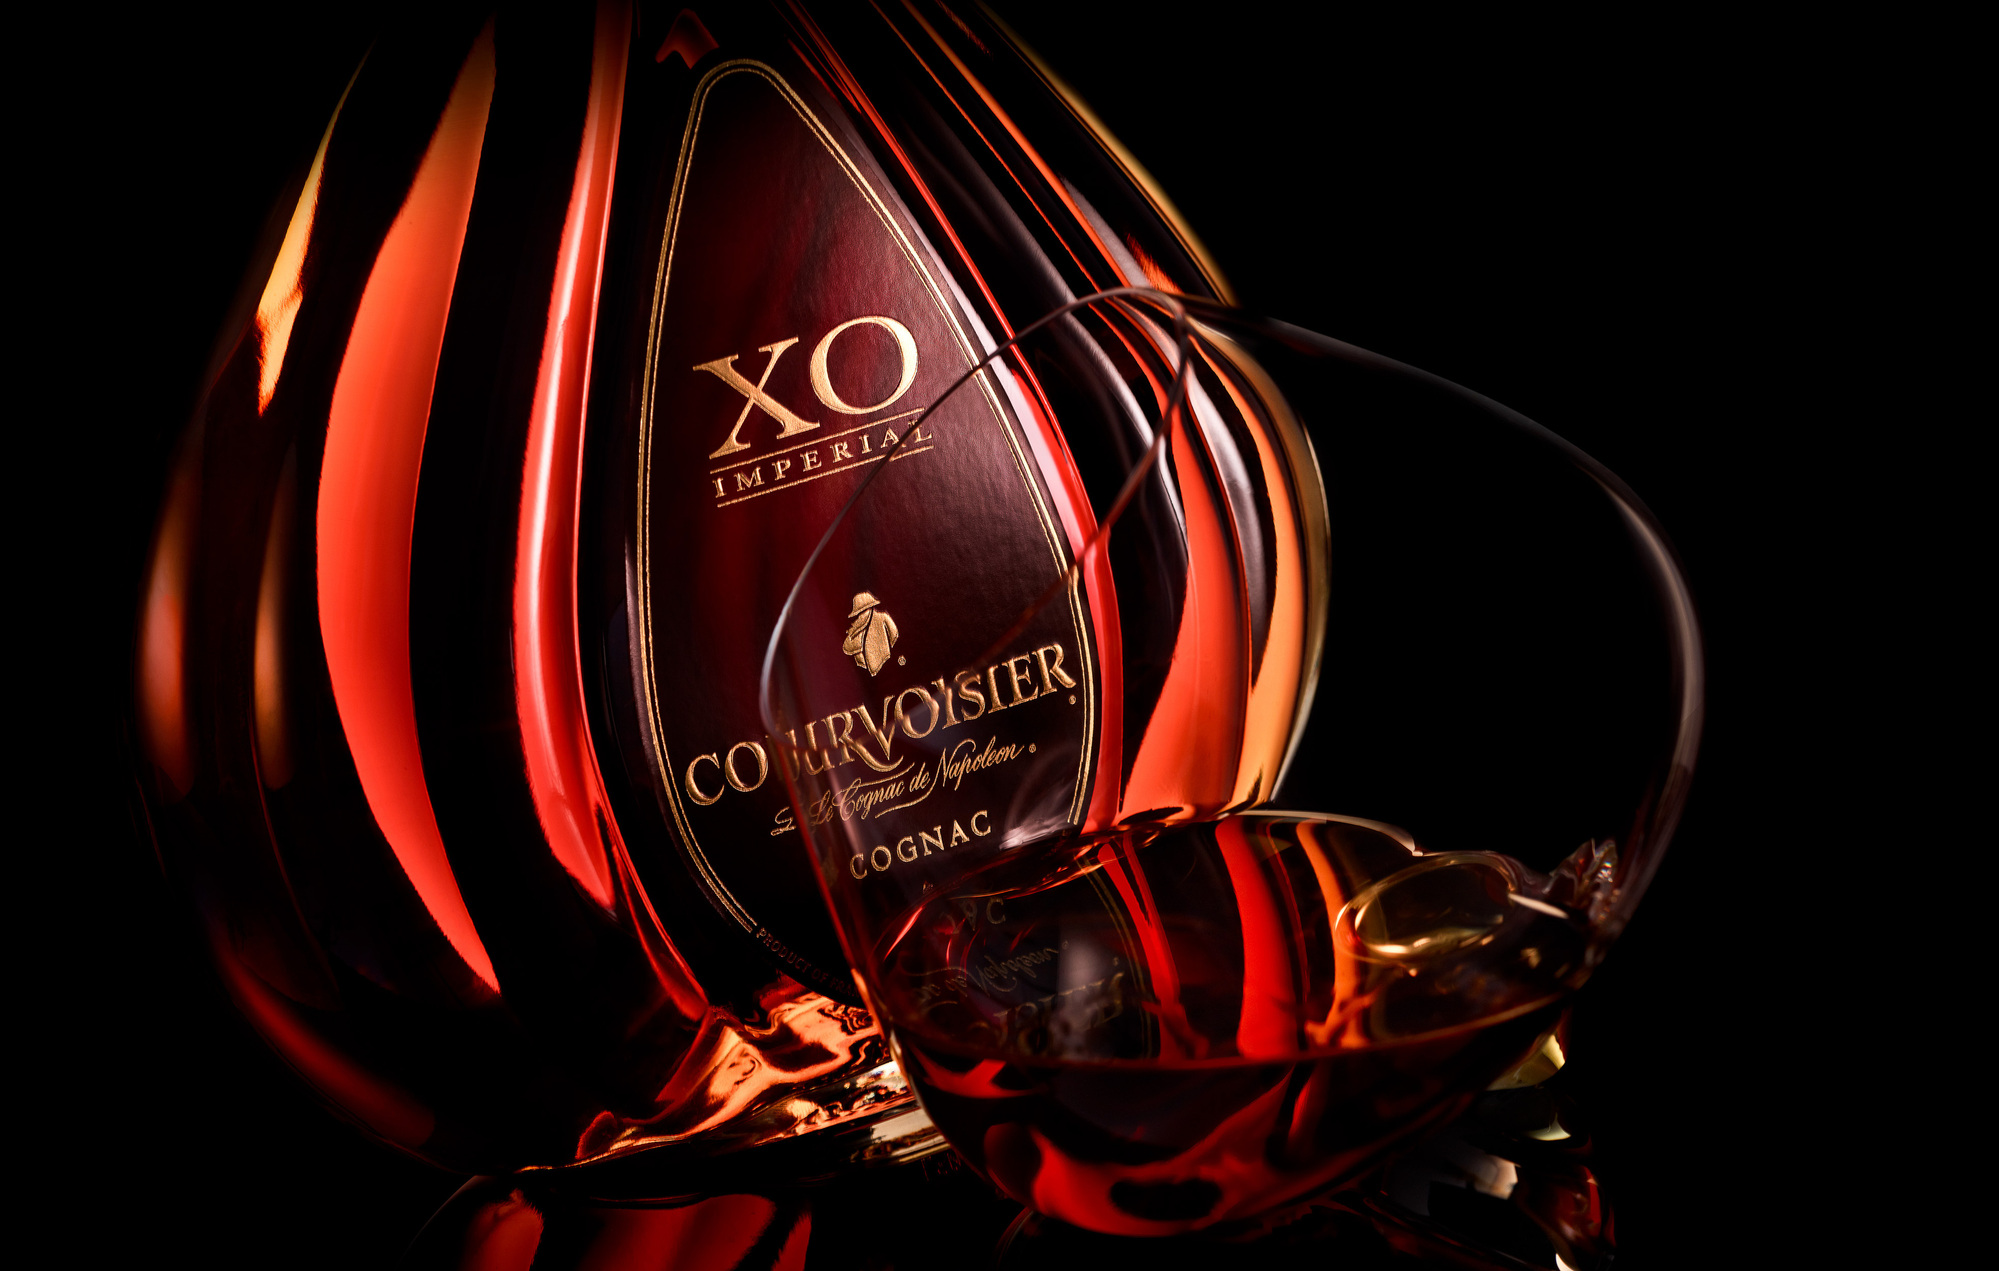 Courvoisier XO close up bottle photography. Beverage and liquid product & advertising photography by Timothy Hogan Studio in Los Angeles